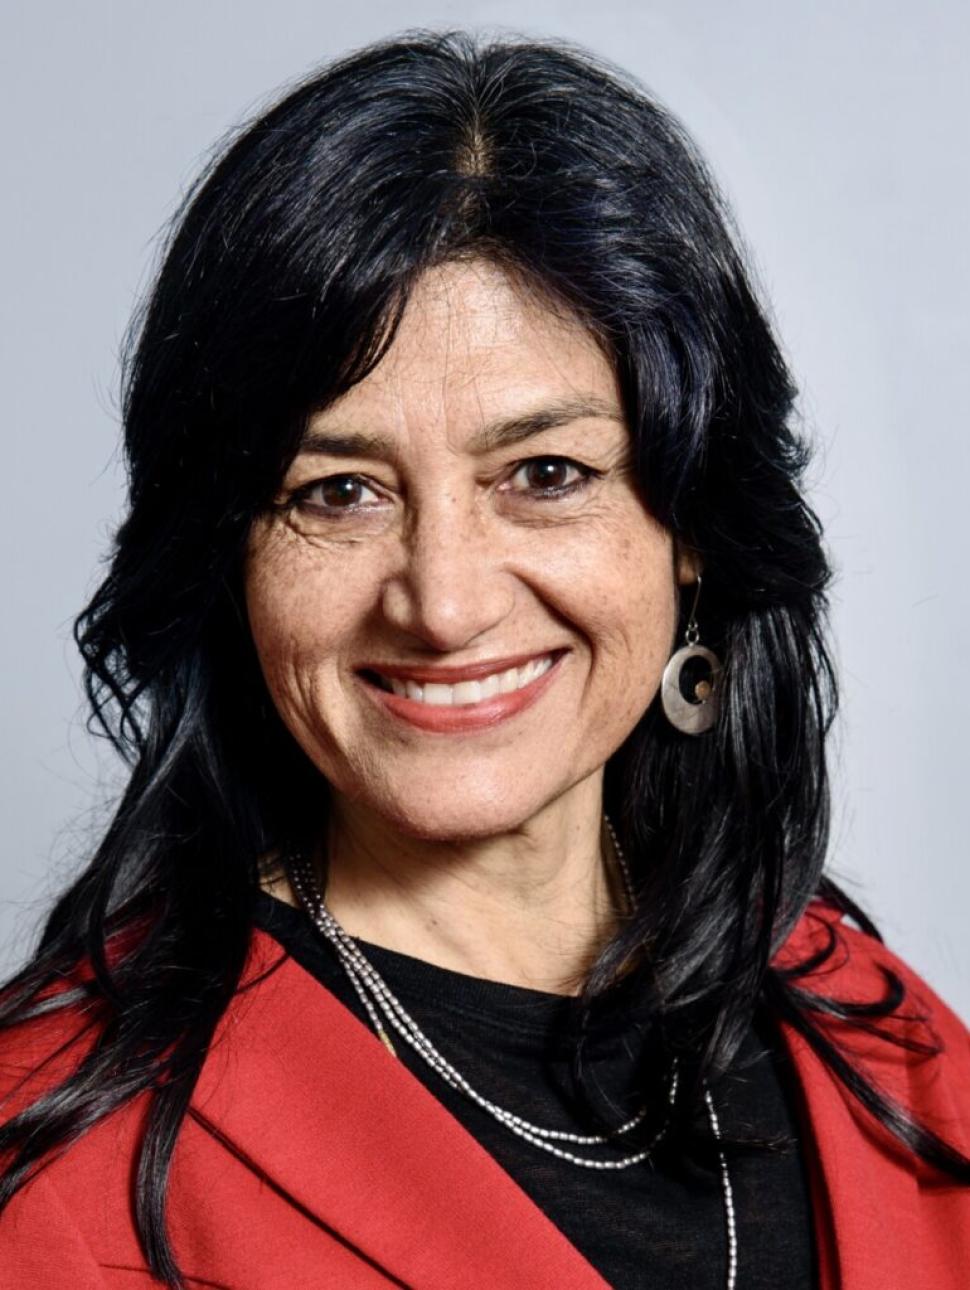 Dr Pilar Kassat is in the middle of the image showing her head and shoulders against a grey background. She is Chilean-Australian, she has long dark hair and brown eyes. She is wearing a black top under a bright red blazer and has large silver earrings and a beaded necklace. She is smiling widely.  